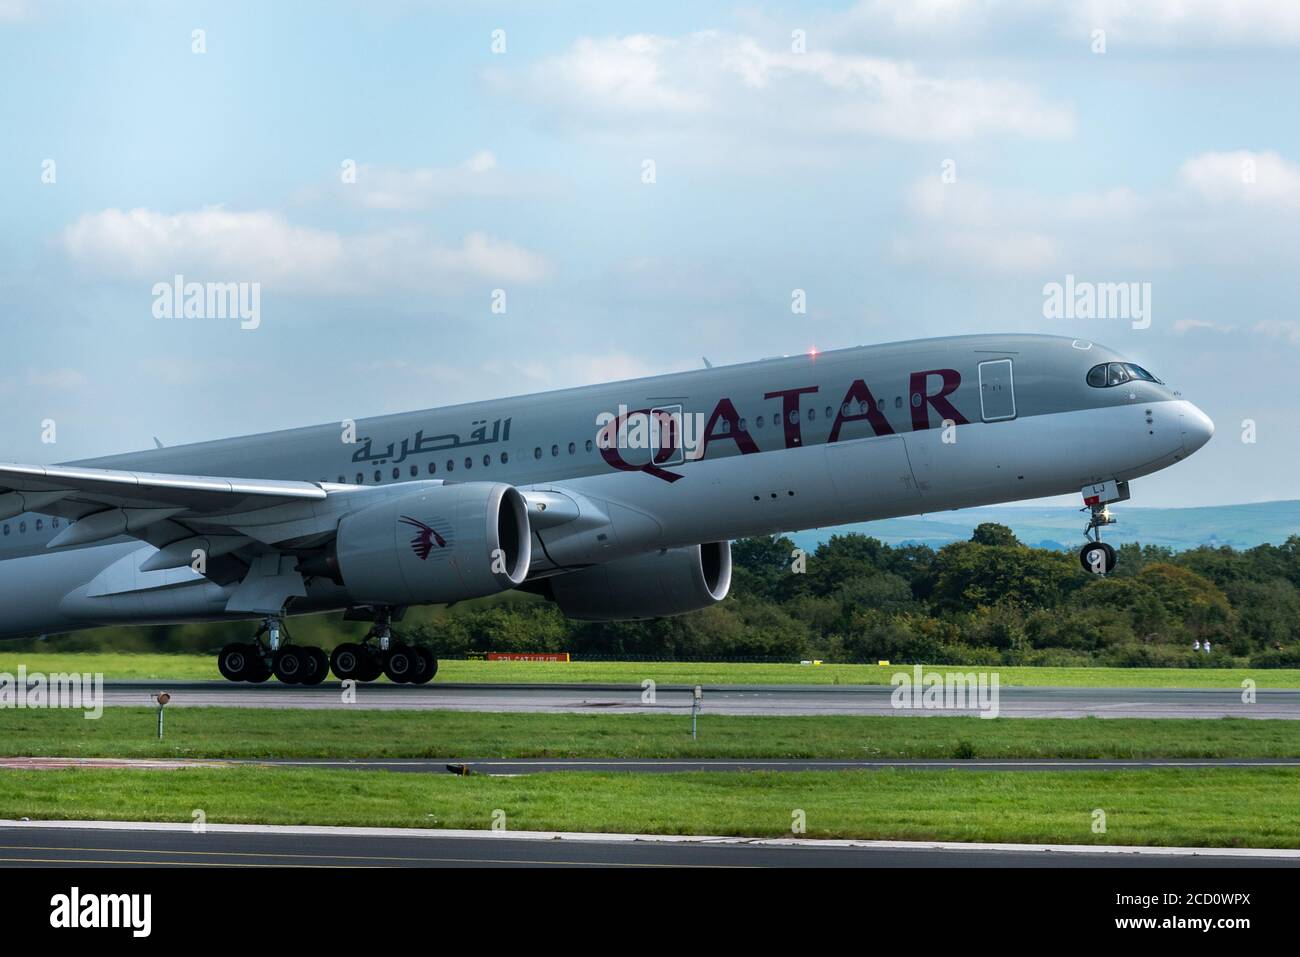 Manchester Uk August 24 Qatar Airlines Airbus A350 941 Flight Qr28 To Doha Qatar Is Documented Taking Off From Runway 23r Stock Photo Alamy